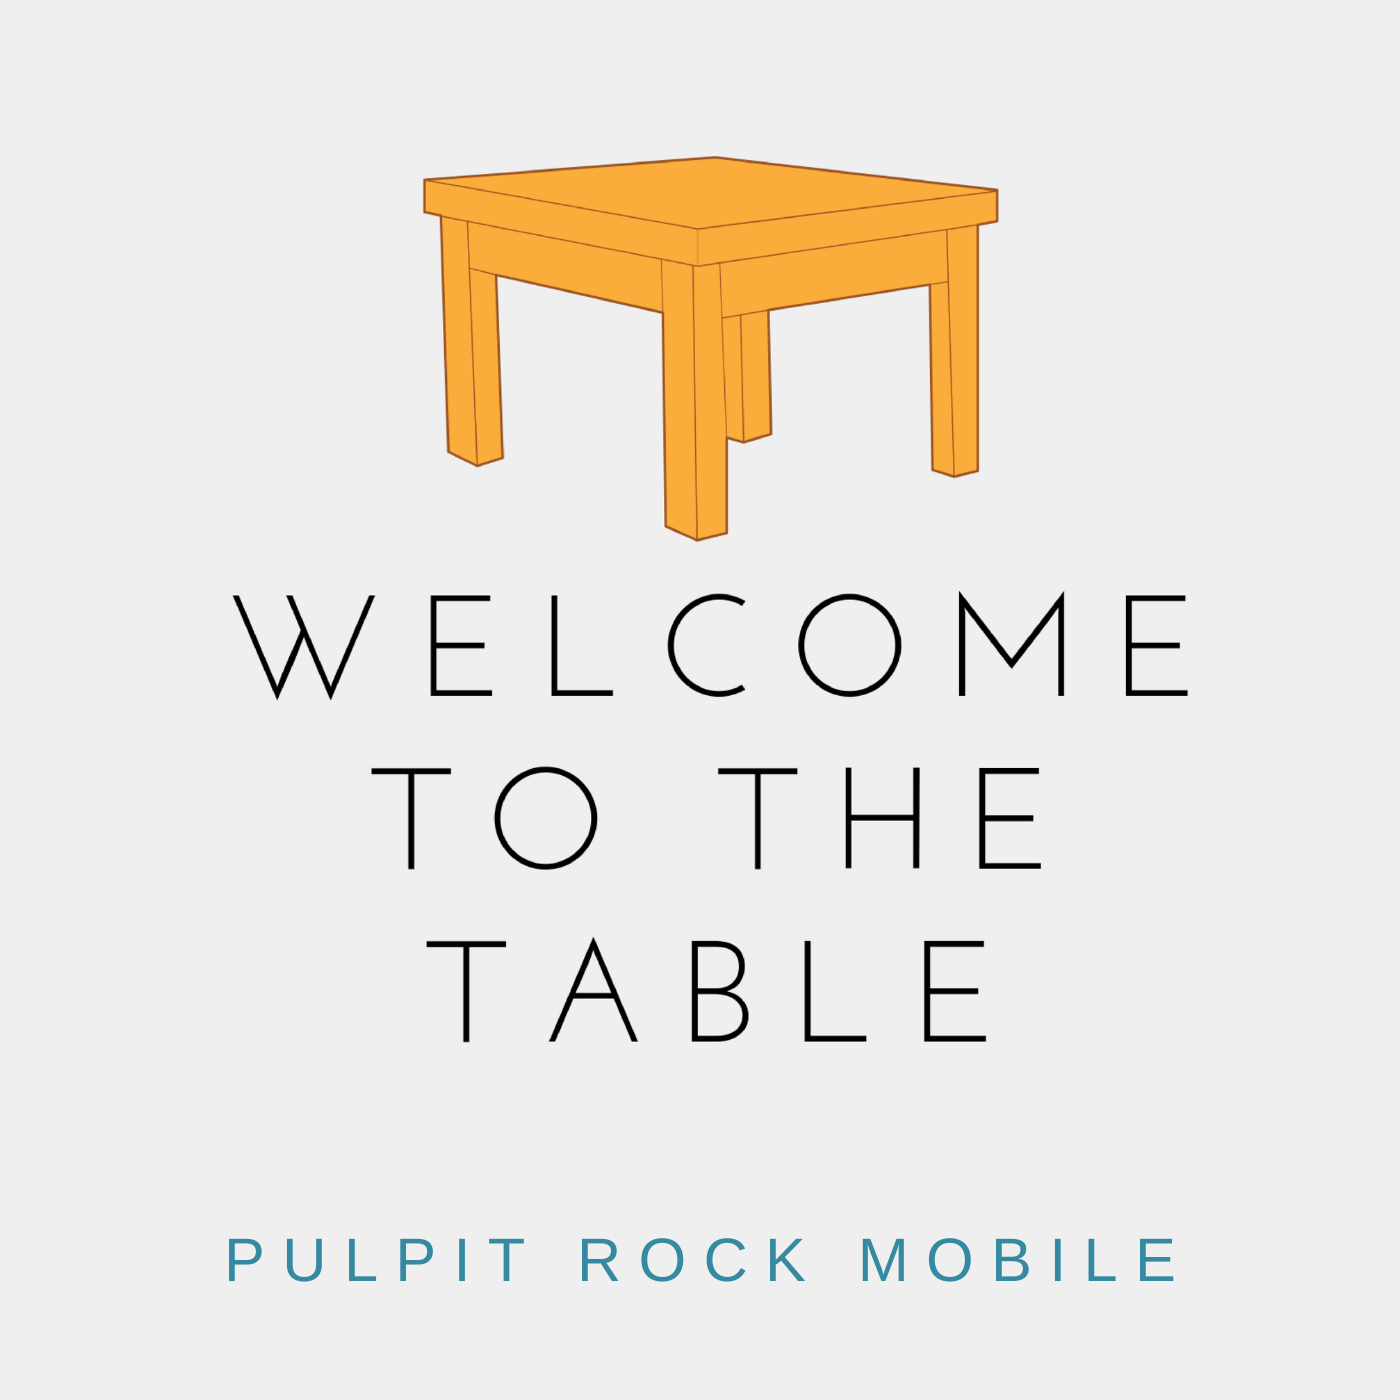 Welcome to the Table